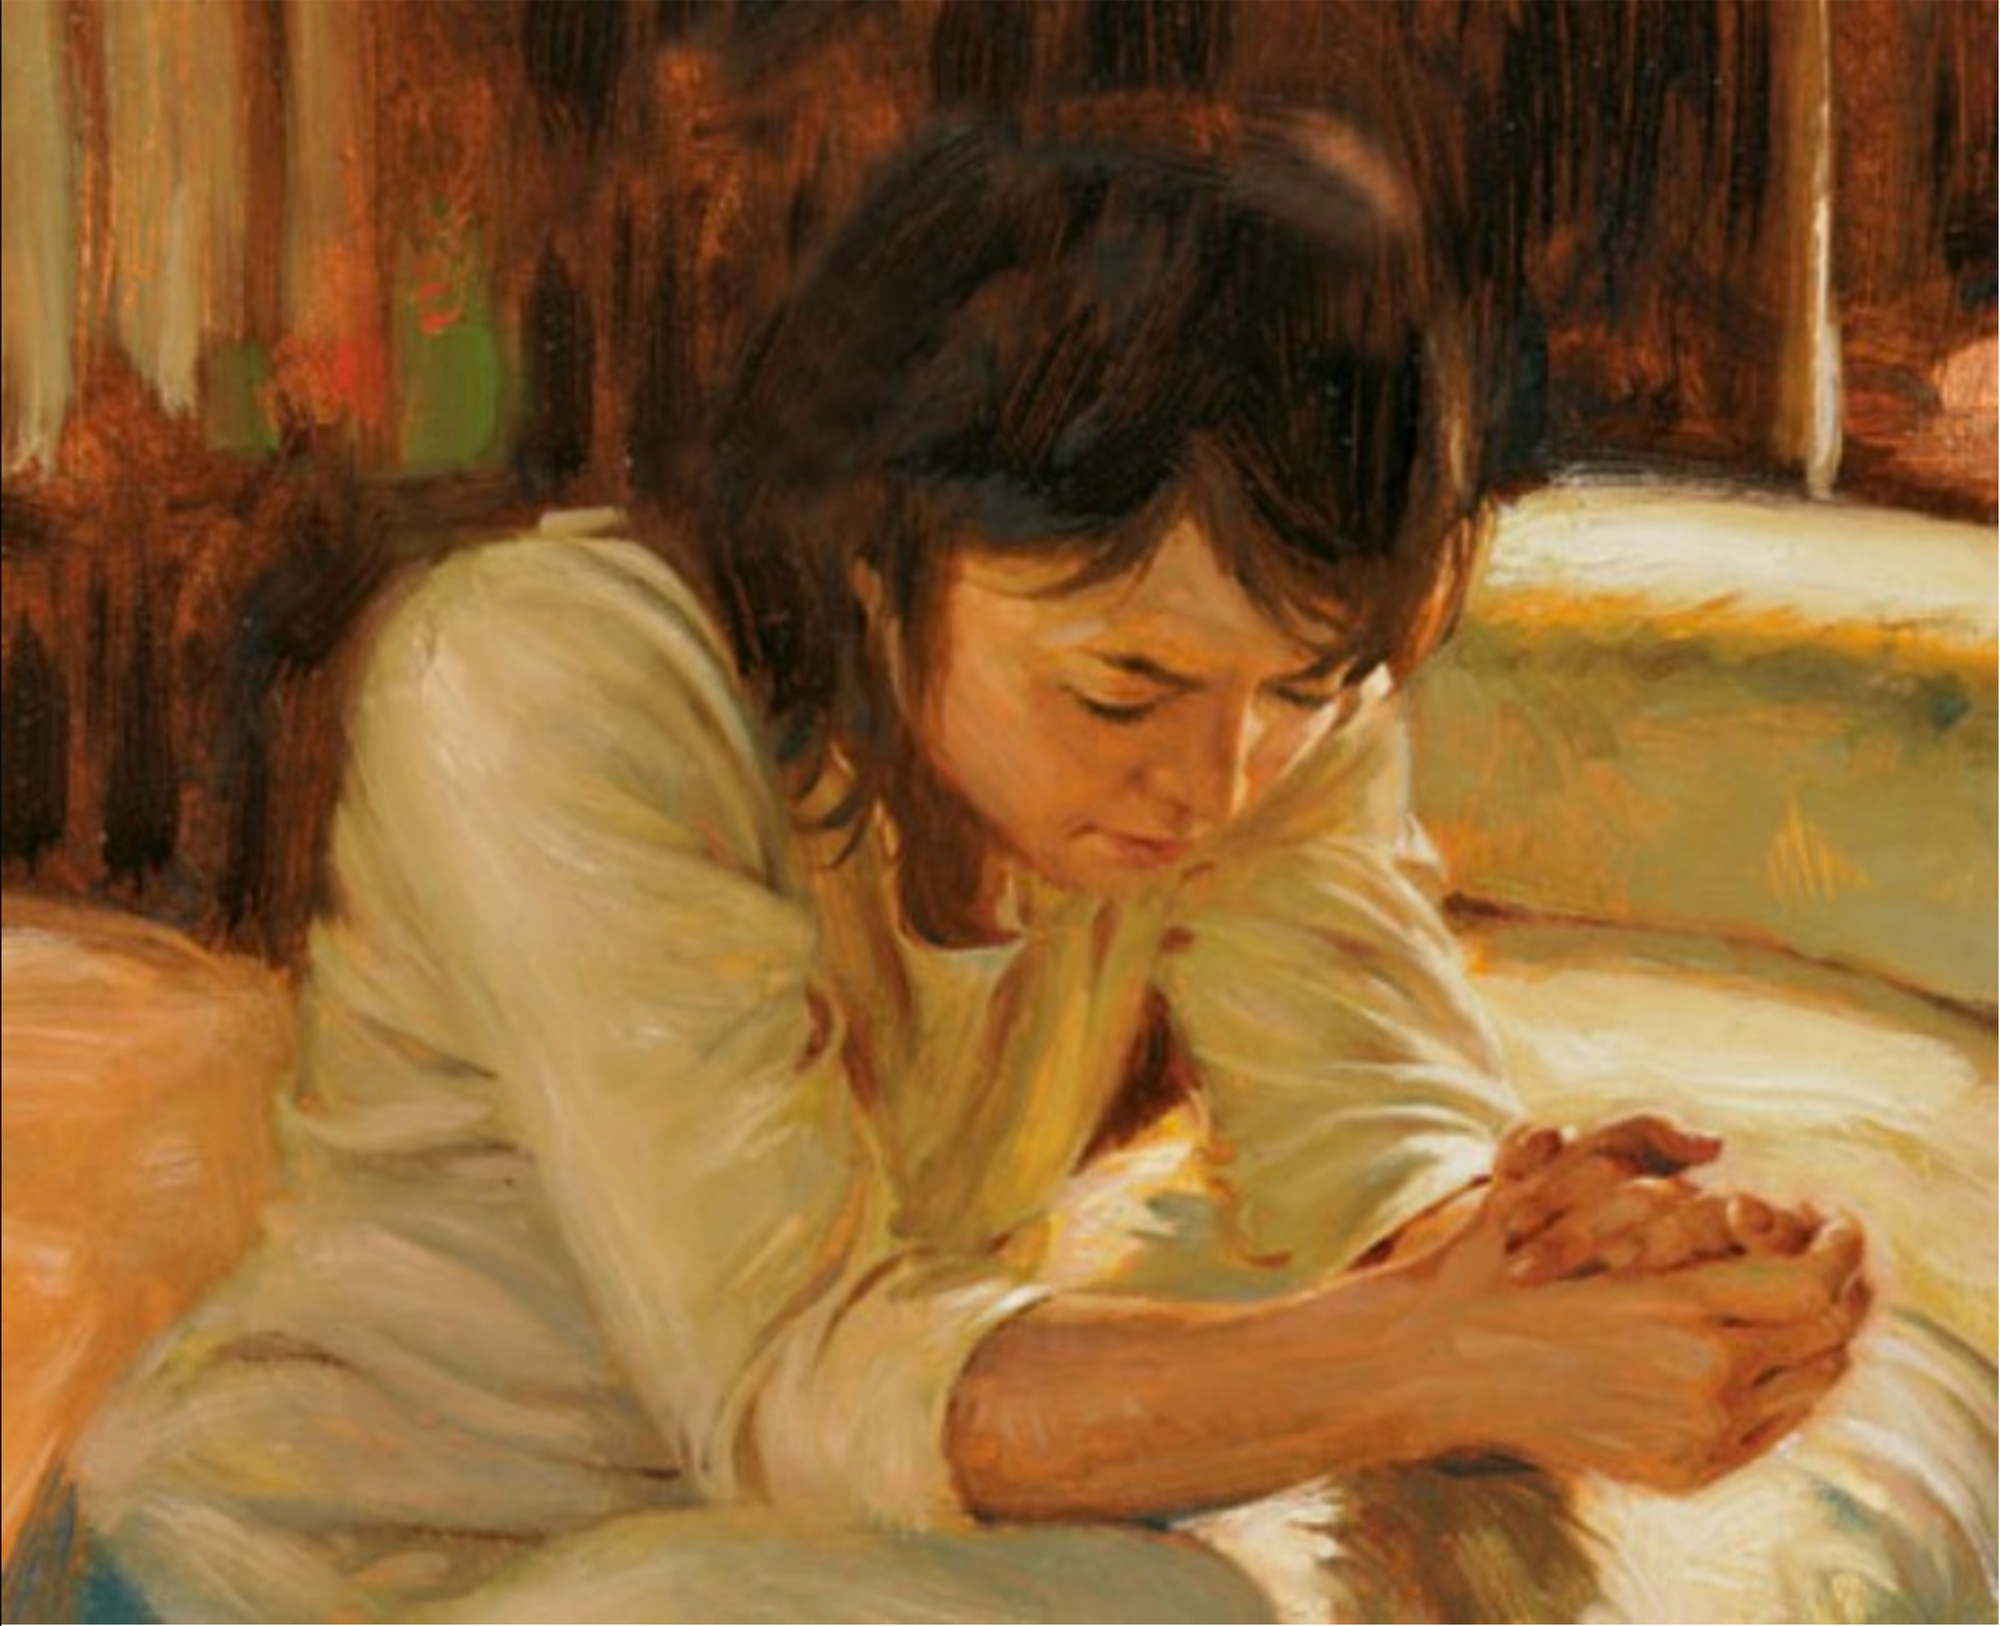 A woman kneels next to a bed. Her hands are clasped together, and her arms are on the bed as she bows her head in prayer. She wears a white shirt and has dark hair.